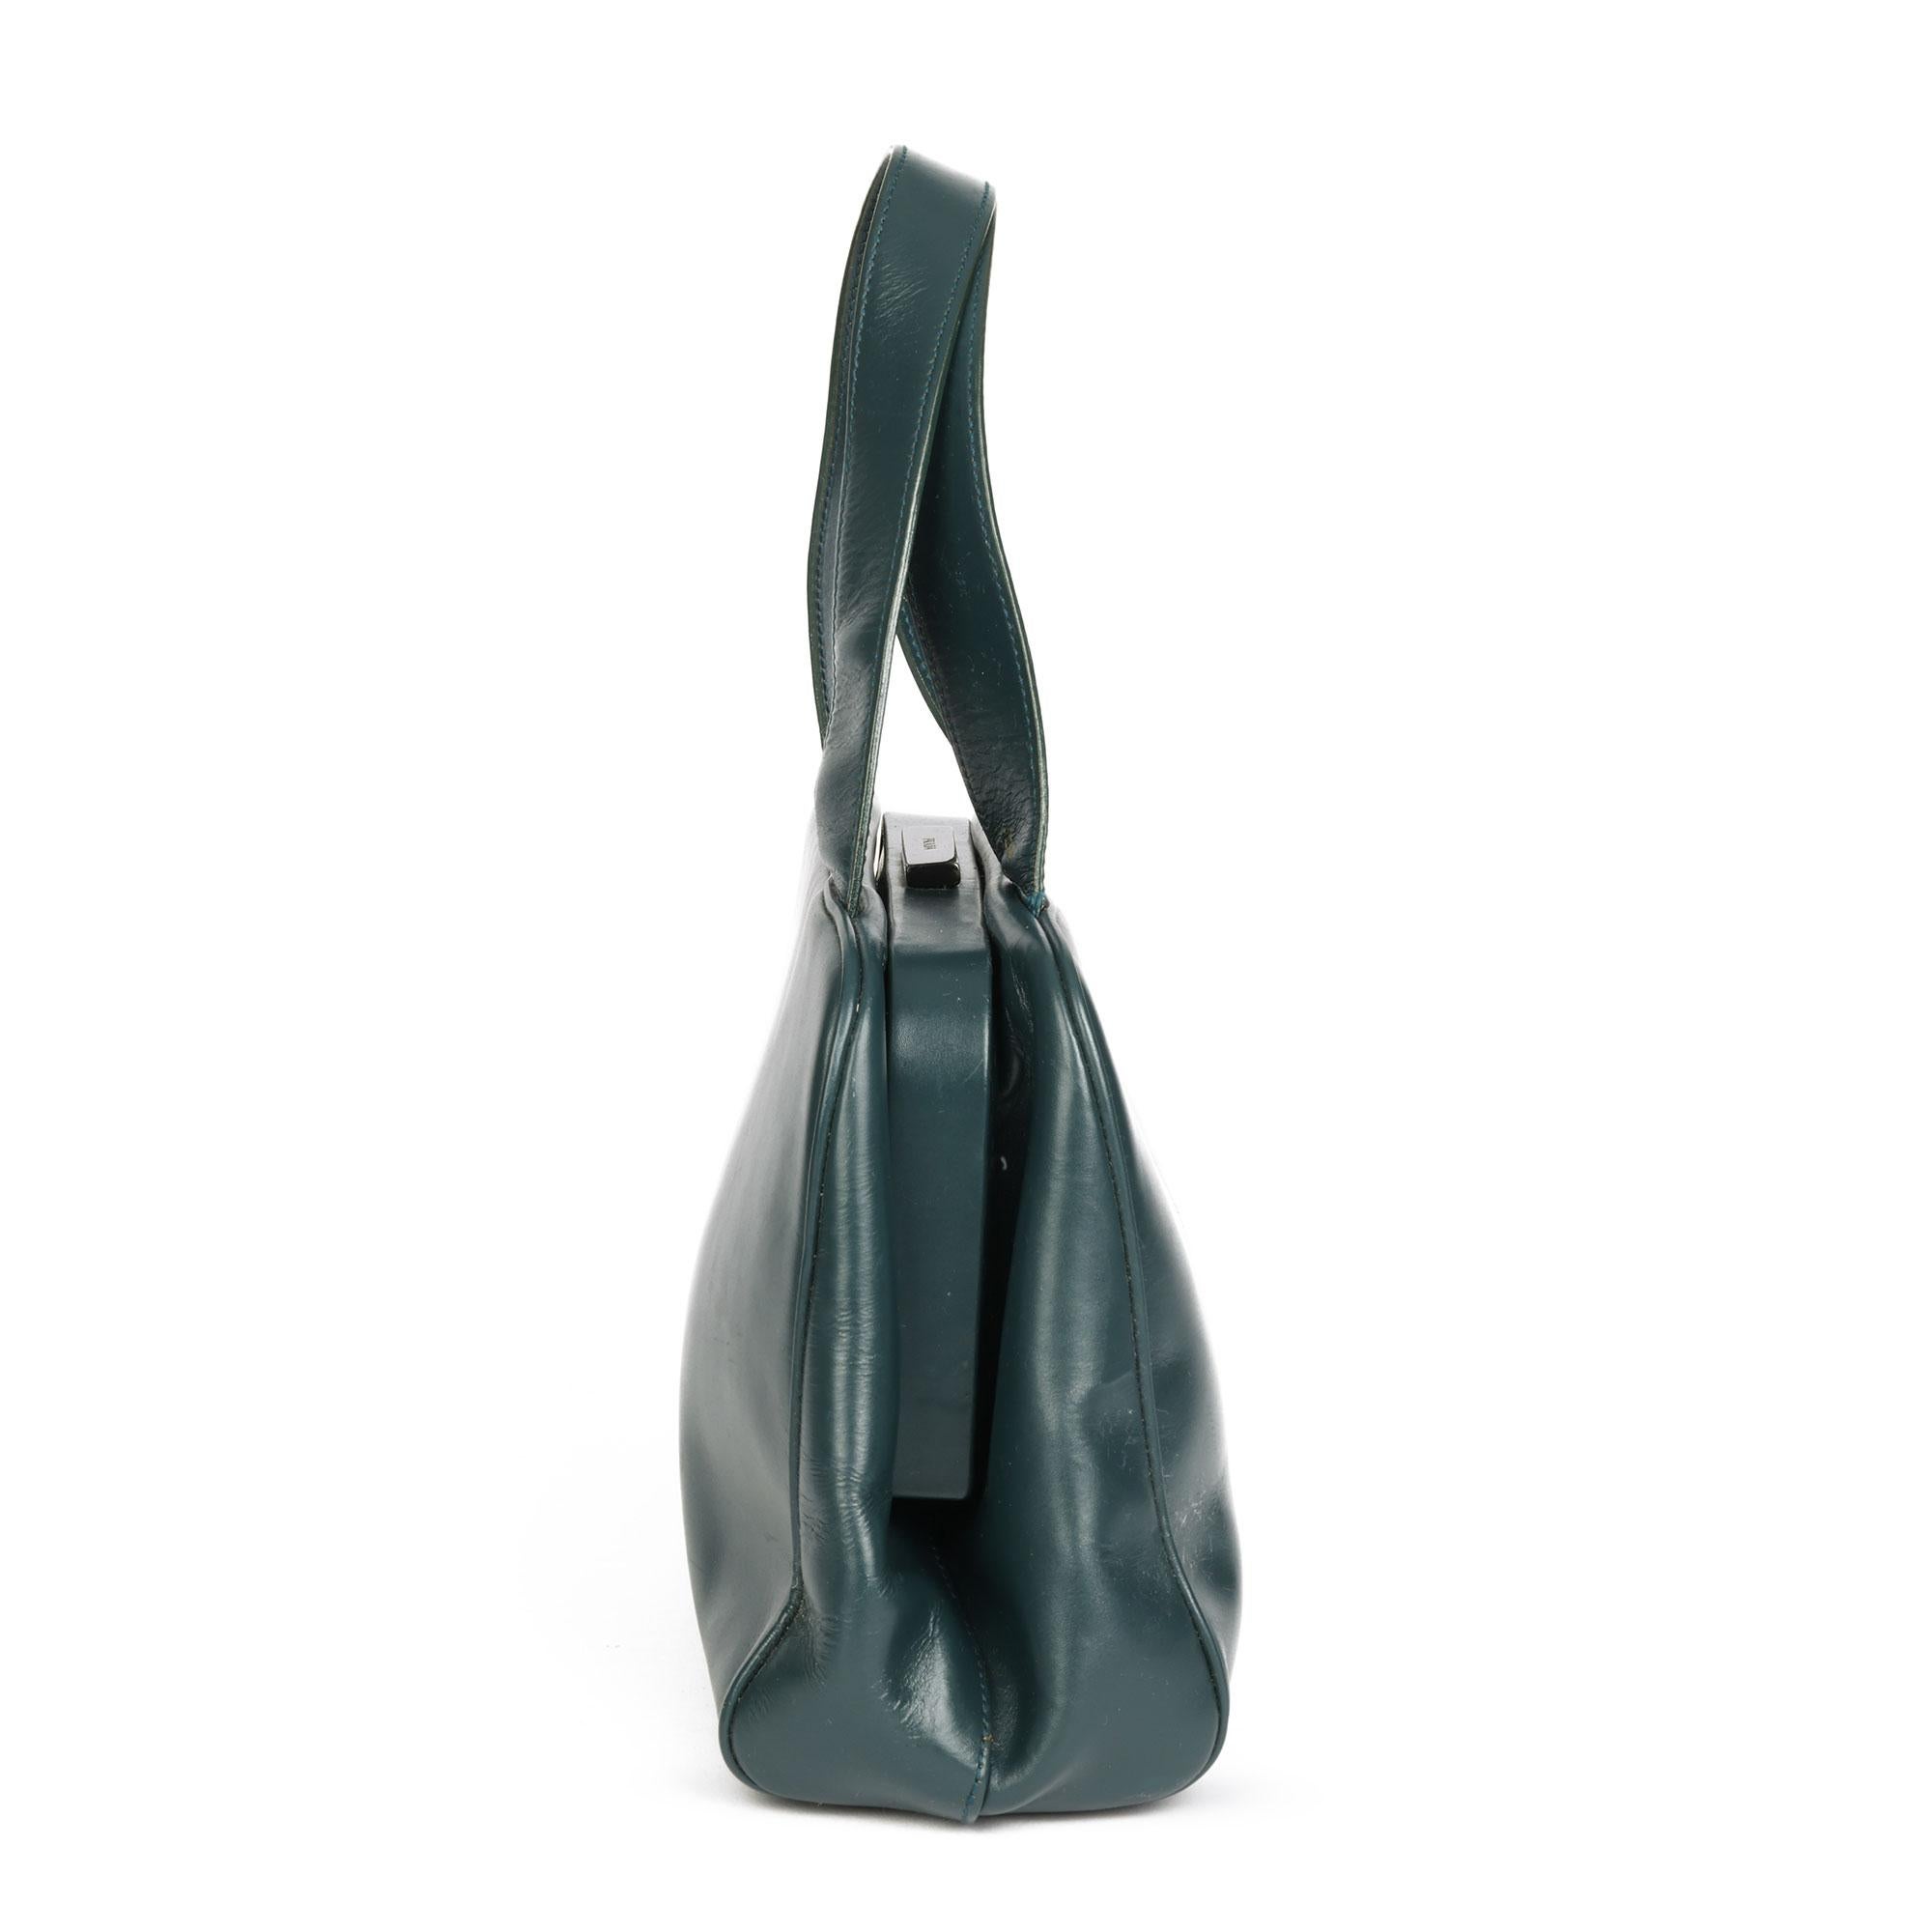 PRADA
Forest Green Calfskin Leather Vintage Frame Bag

Xupes Reference: CWAHF-HB018
Serial Number: 24
Age (Circa): 1996
Accompanied By: Prada Dust Bag
Authenticity Details: Date Stamp (Made in Italy)
Gender: Ladies
Type: Tote

Colour: Forest